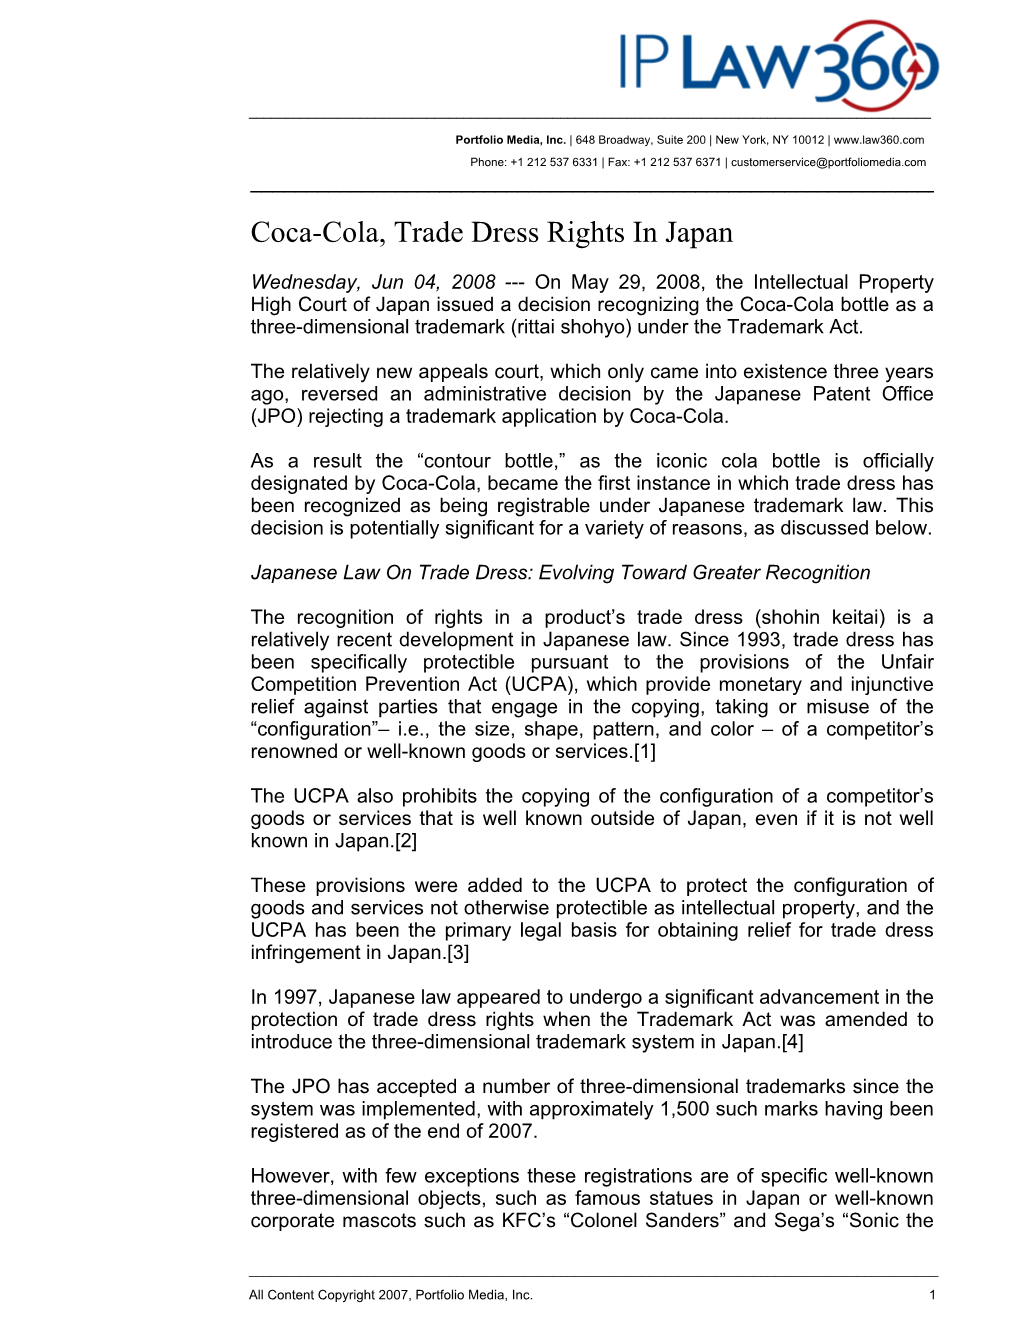 Coca-Cola, Trade Dress Rights in Japan